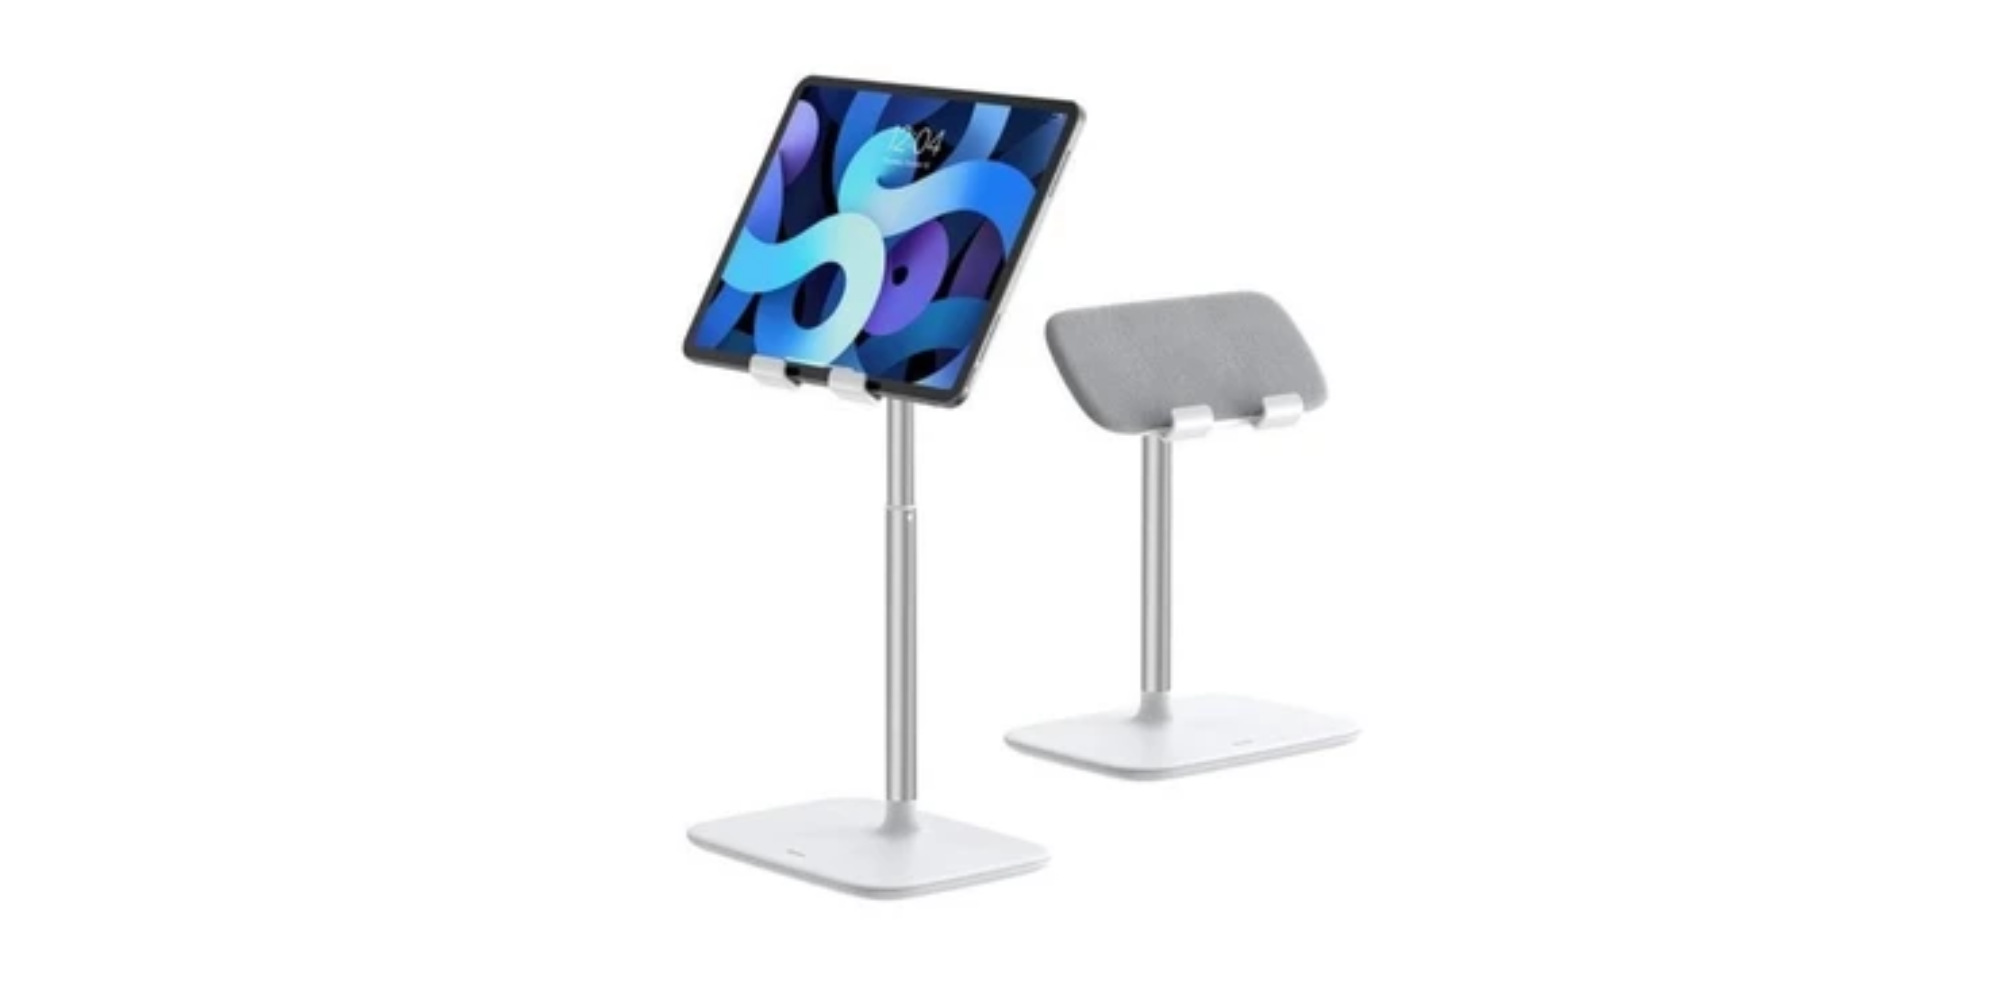  Indoorsy Youth Tablet Desk Stand Telescopic Version